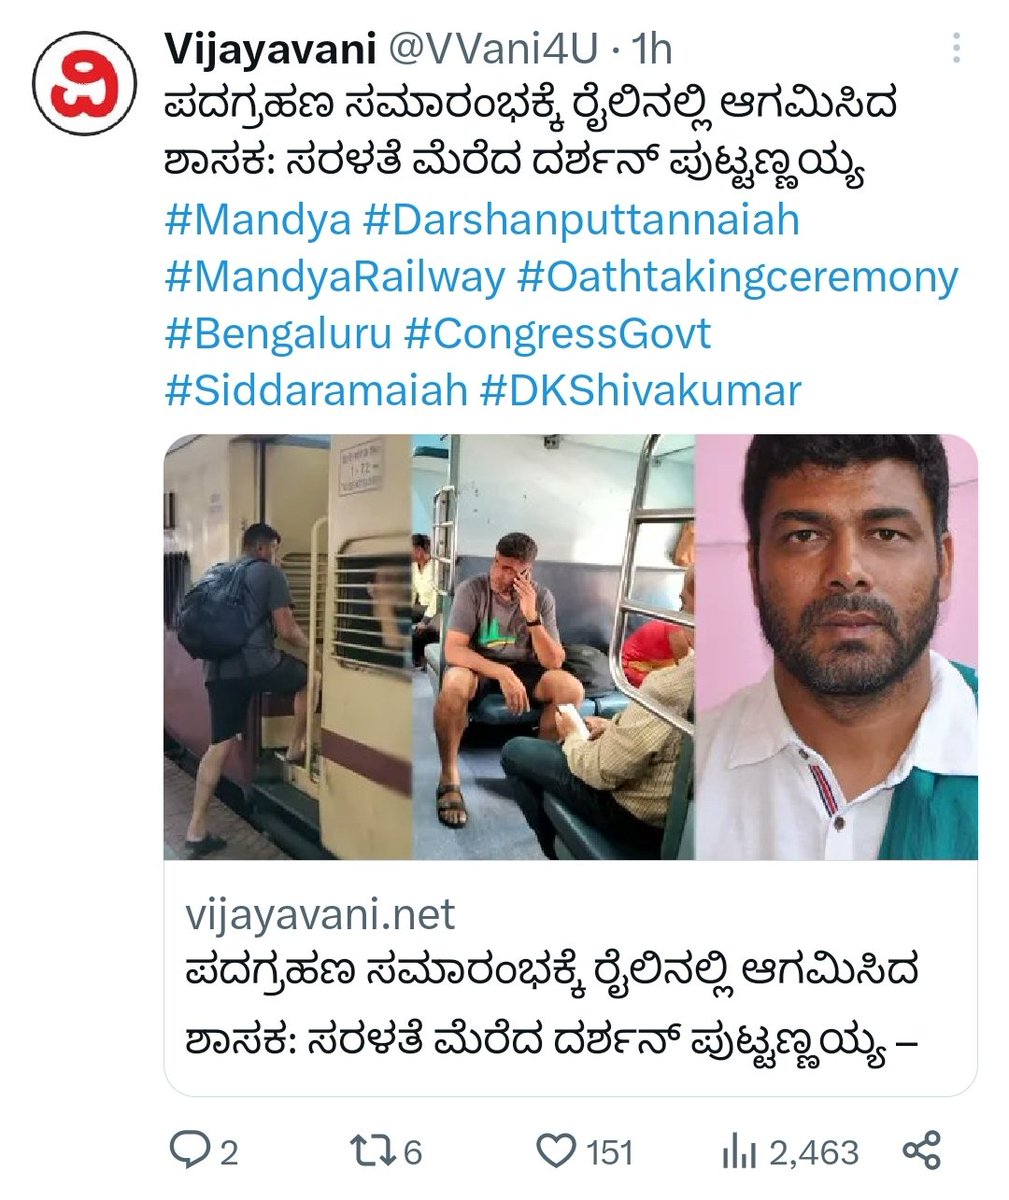 #Karnataka
Darshan Puttannaiah, Independent supported by cong.
A Tech entrepreneur based out of Denver. Lived in the USA for about 20 years.
Arrived by train for the swearing in ceremony.